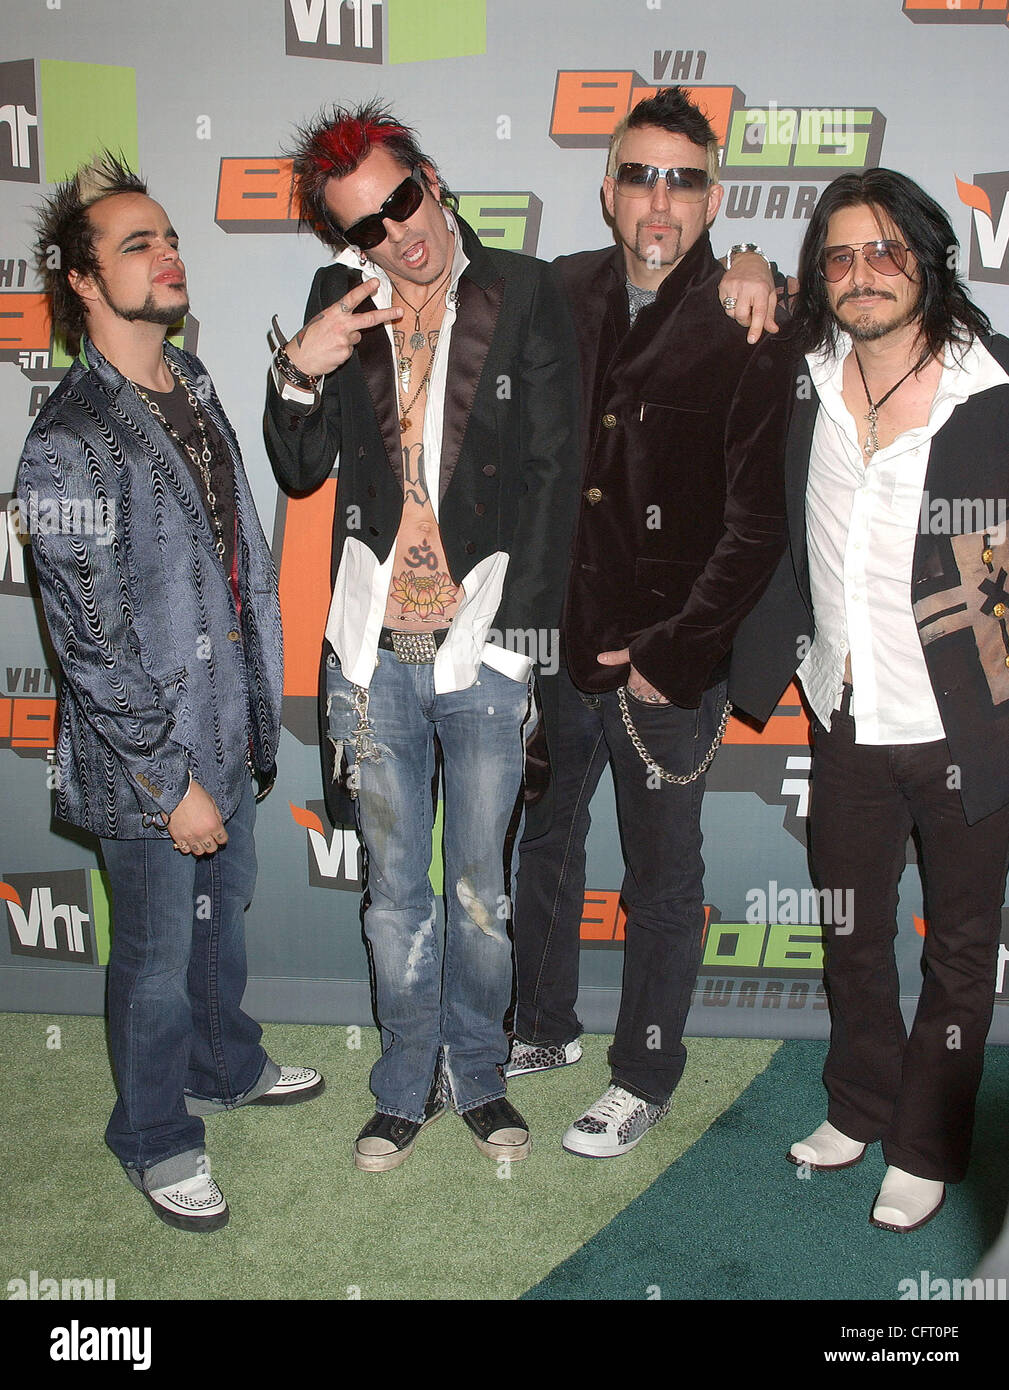 Dec 02, 2006; Los Angeles, California, USA; Musicians TOMMY LEE and his  group SUPERNOVA at the VH1 Big in 2006 Awards held on the Sony Studios lot,  Culver City, Los Angeles. Mandatory